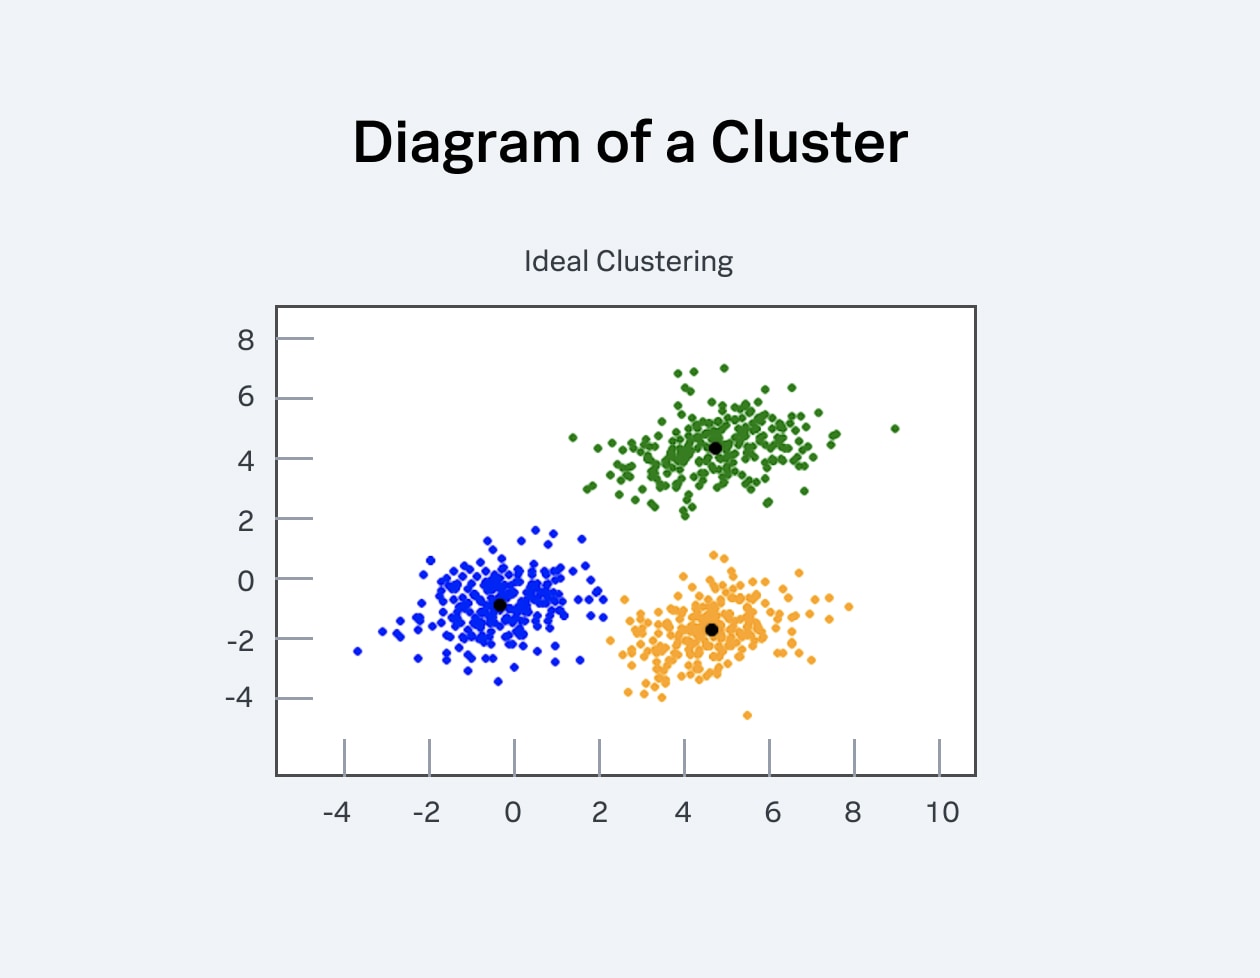 Diagram of a Cluster